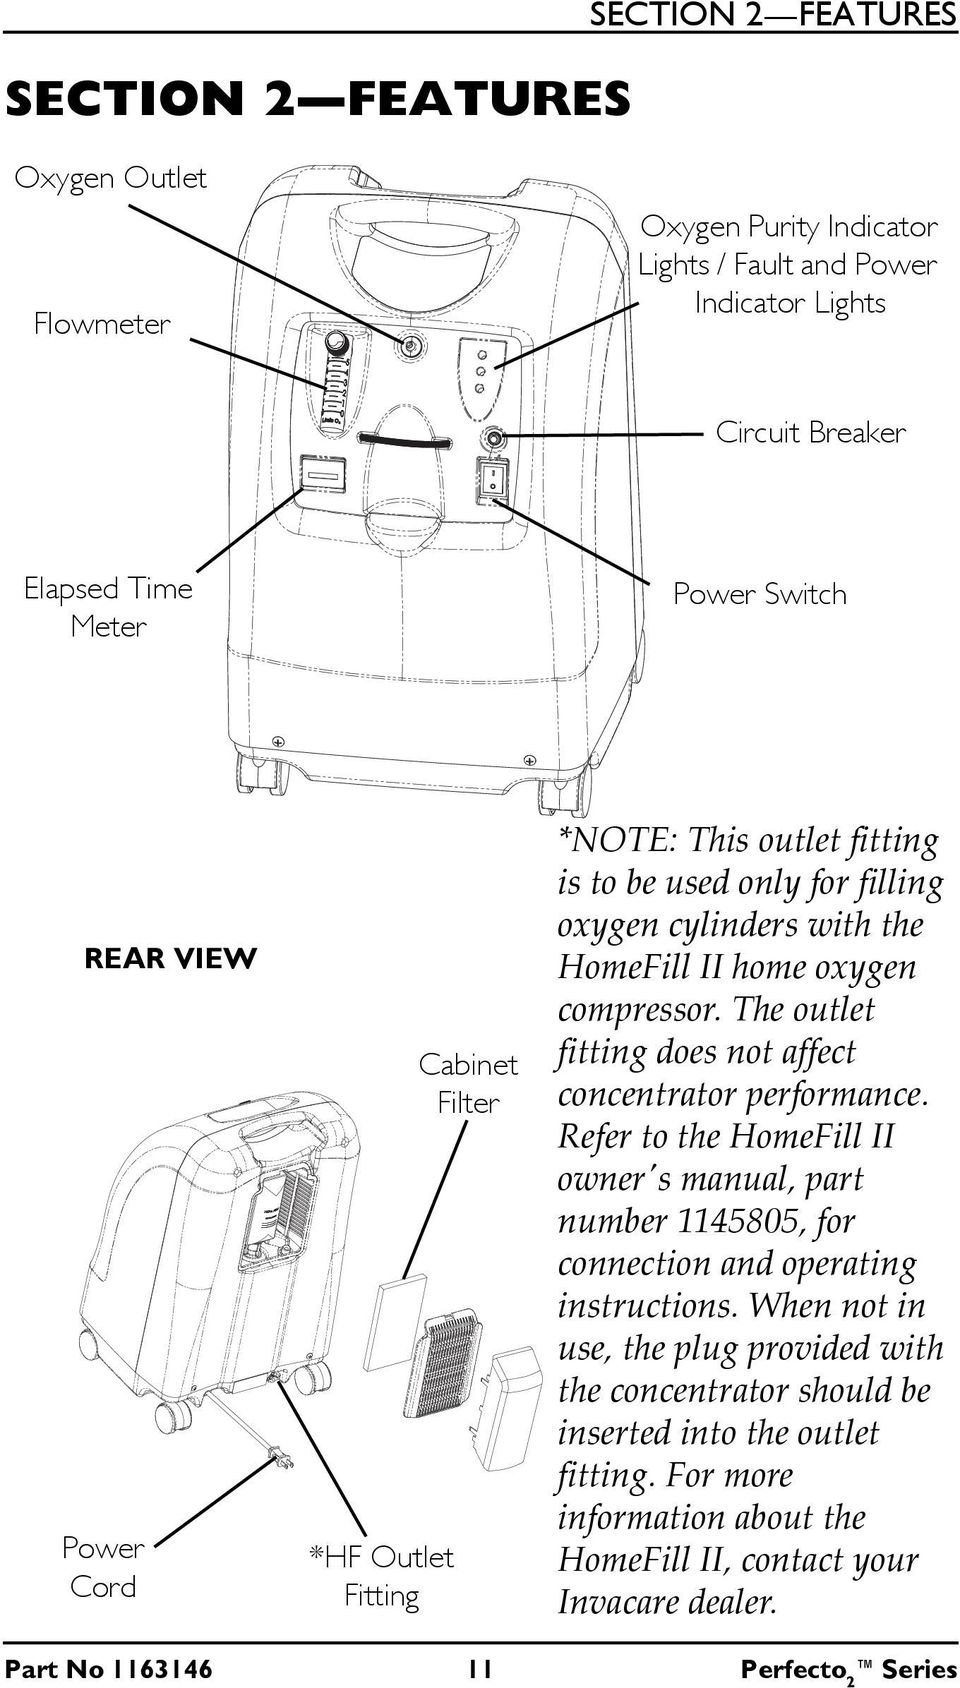 The outlet fitting does not affect concentrator performance. Refer to the HomeFill II ownerʹs manual, part number 1145805, for connection and operating instructions.